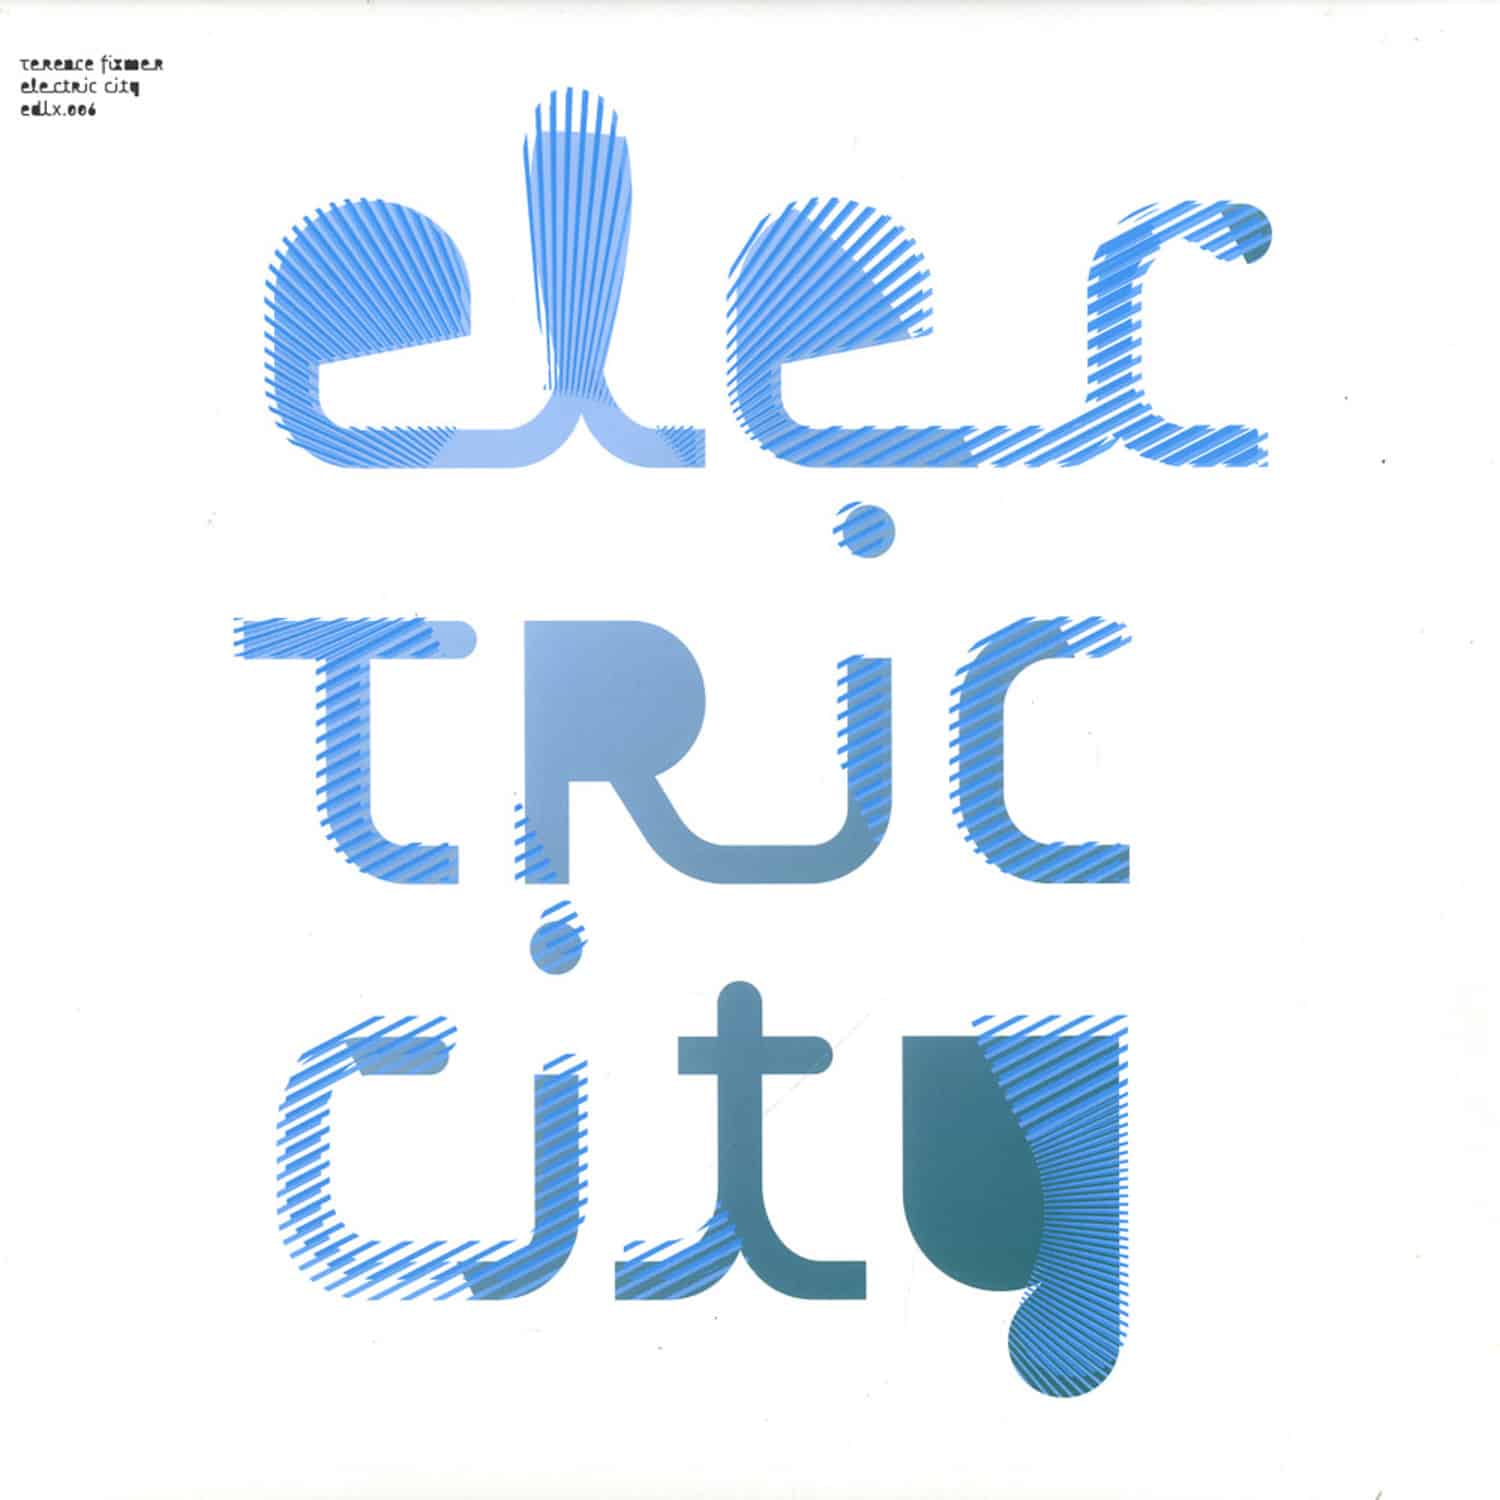 Terence Fixmer - ELECTRIC CITY, FUNCTION RMX